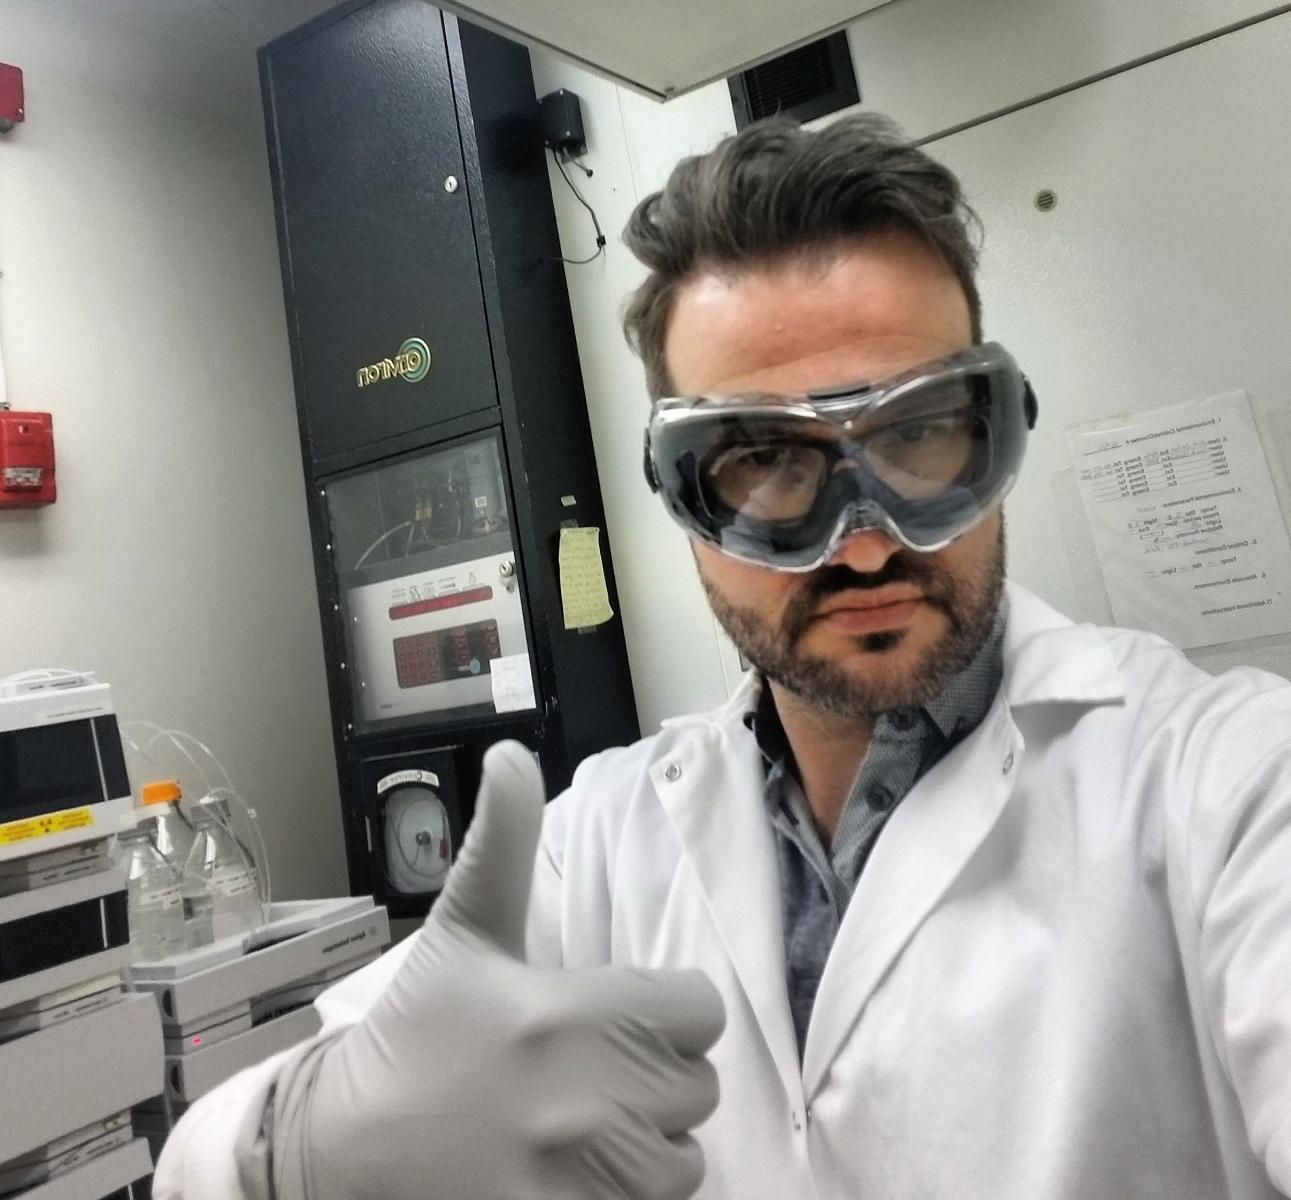 Erik Emilson wearing safety goggles and a white lab coat giving a thumbs up